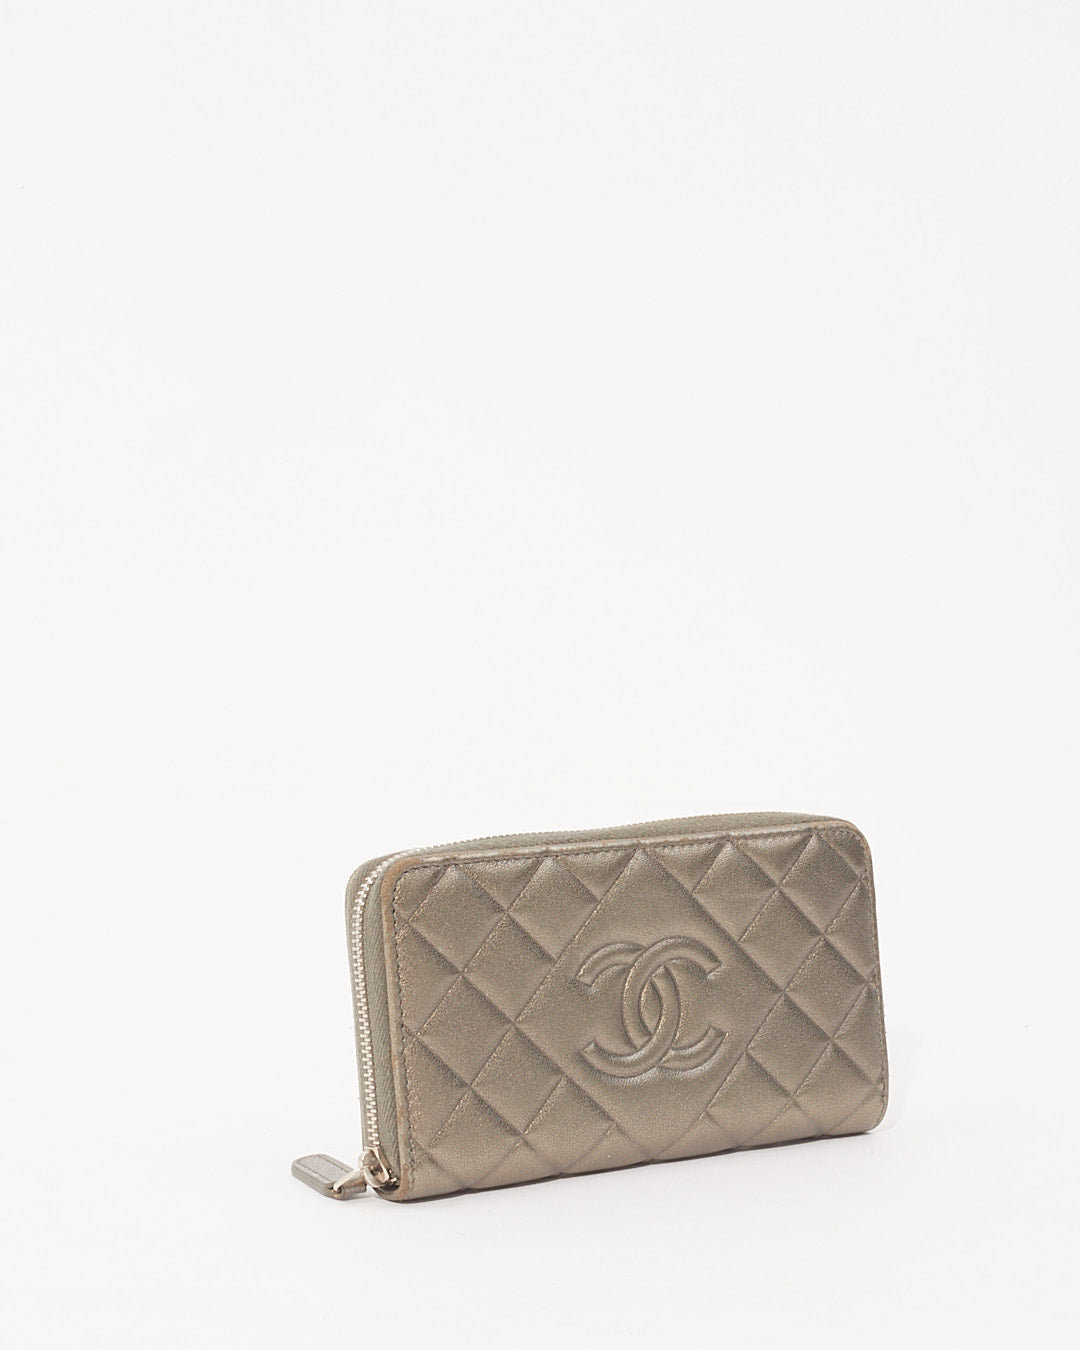 Chanel Silver Quilted Leather CC Zip Around Wallet